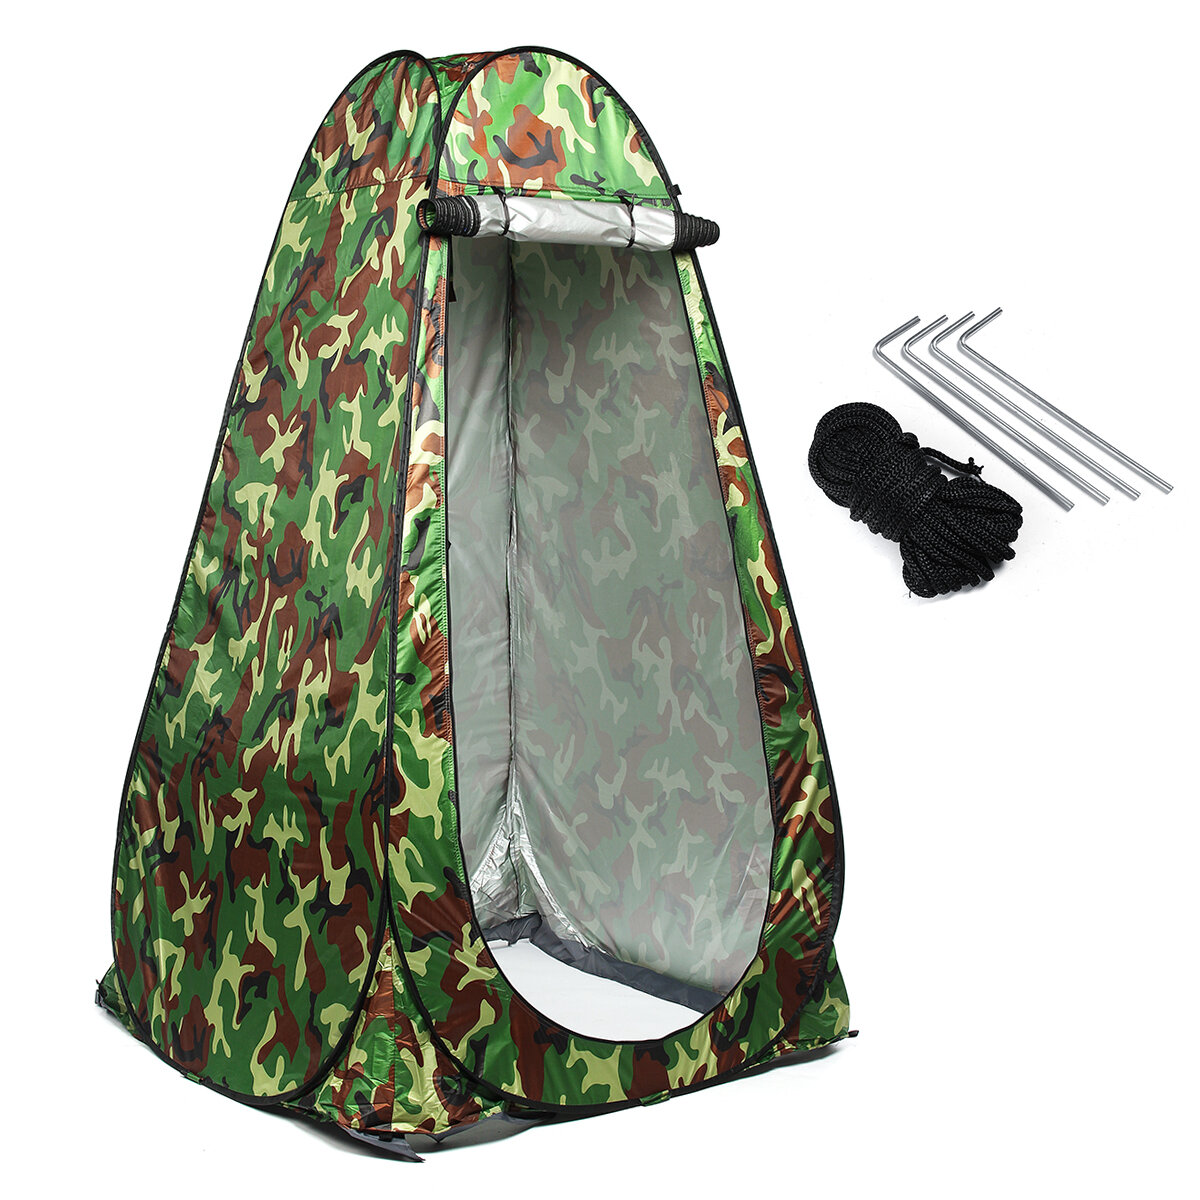 190cm Instant Shower Tent Camping Toilet Privacy Dressing Room Waterproof UV-proof Fishing Canopy Shade